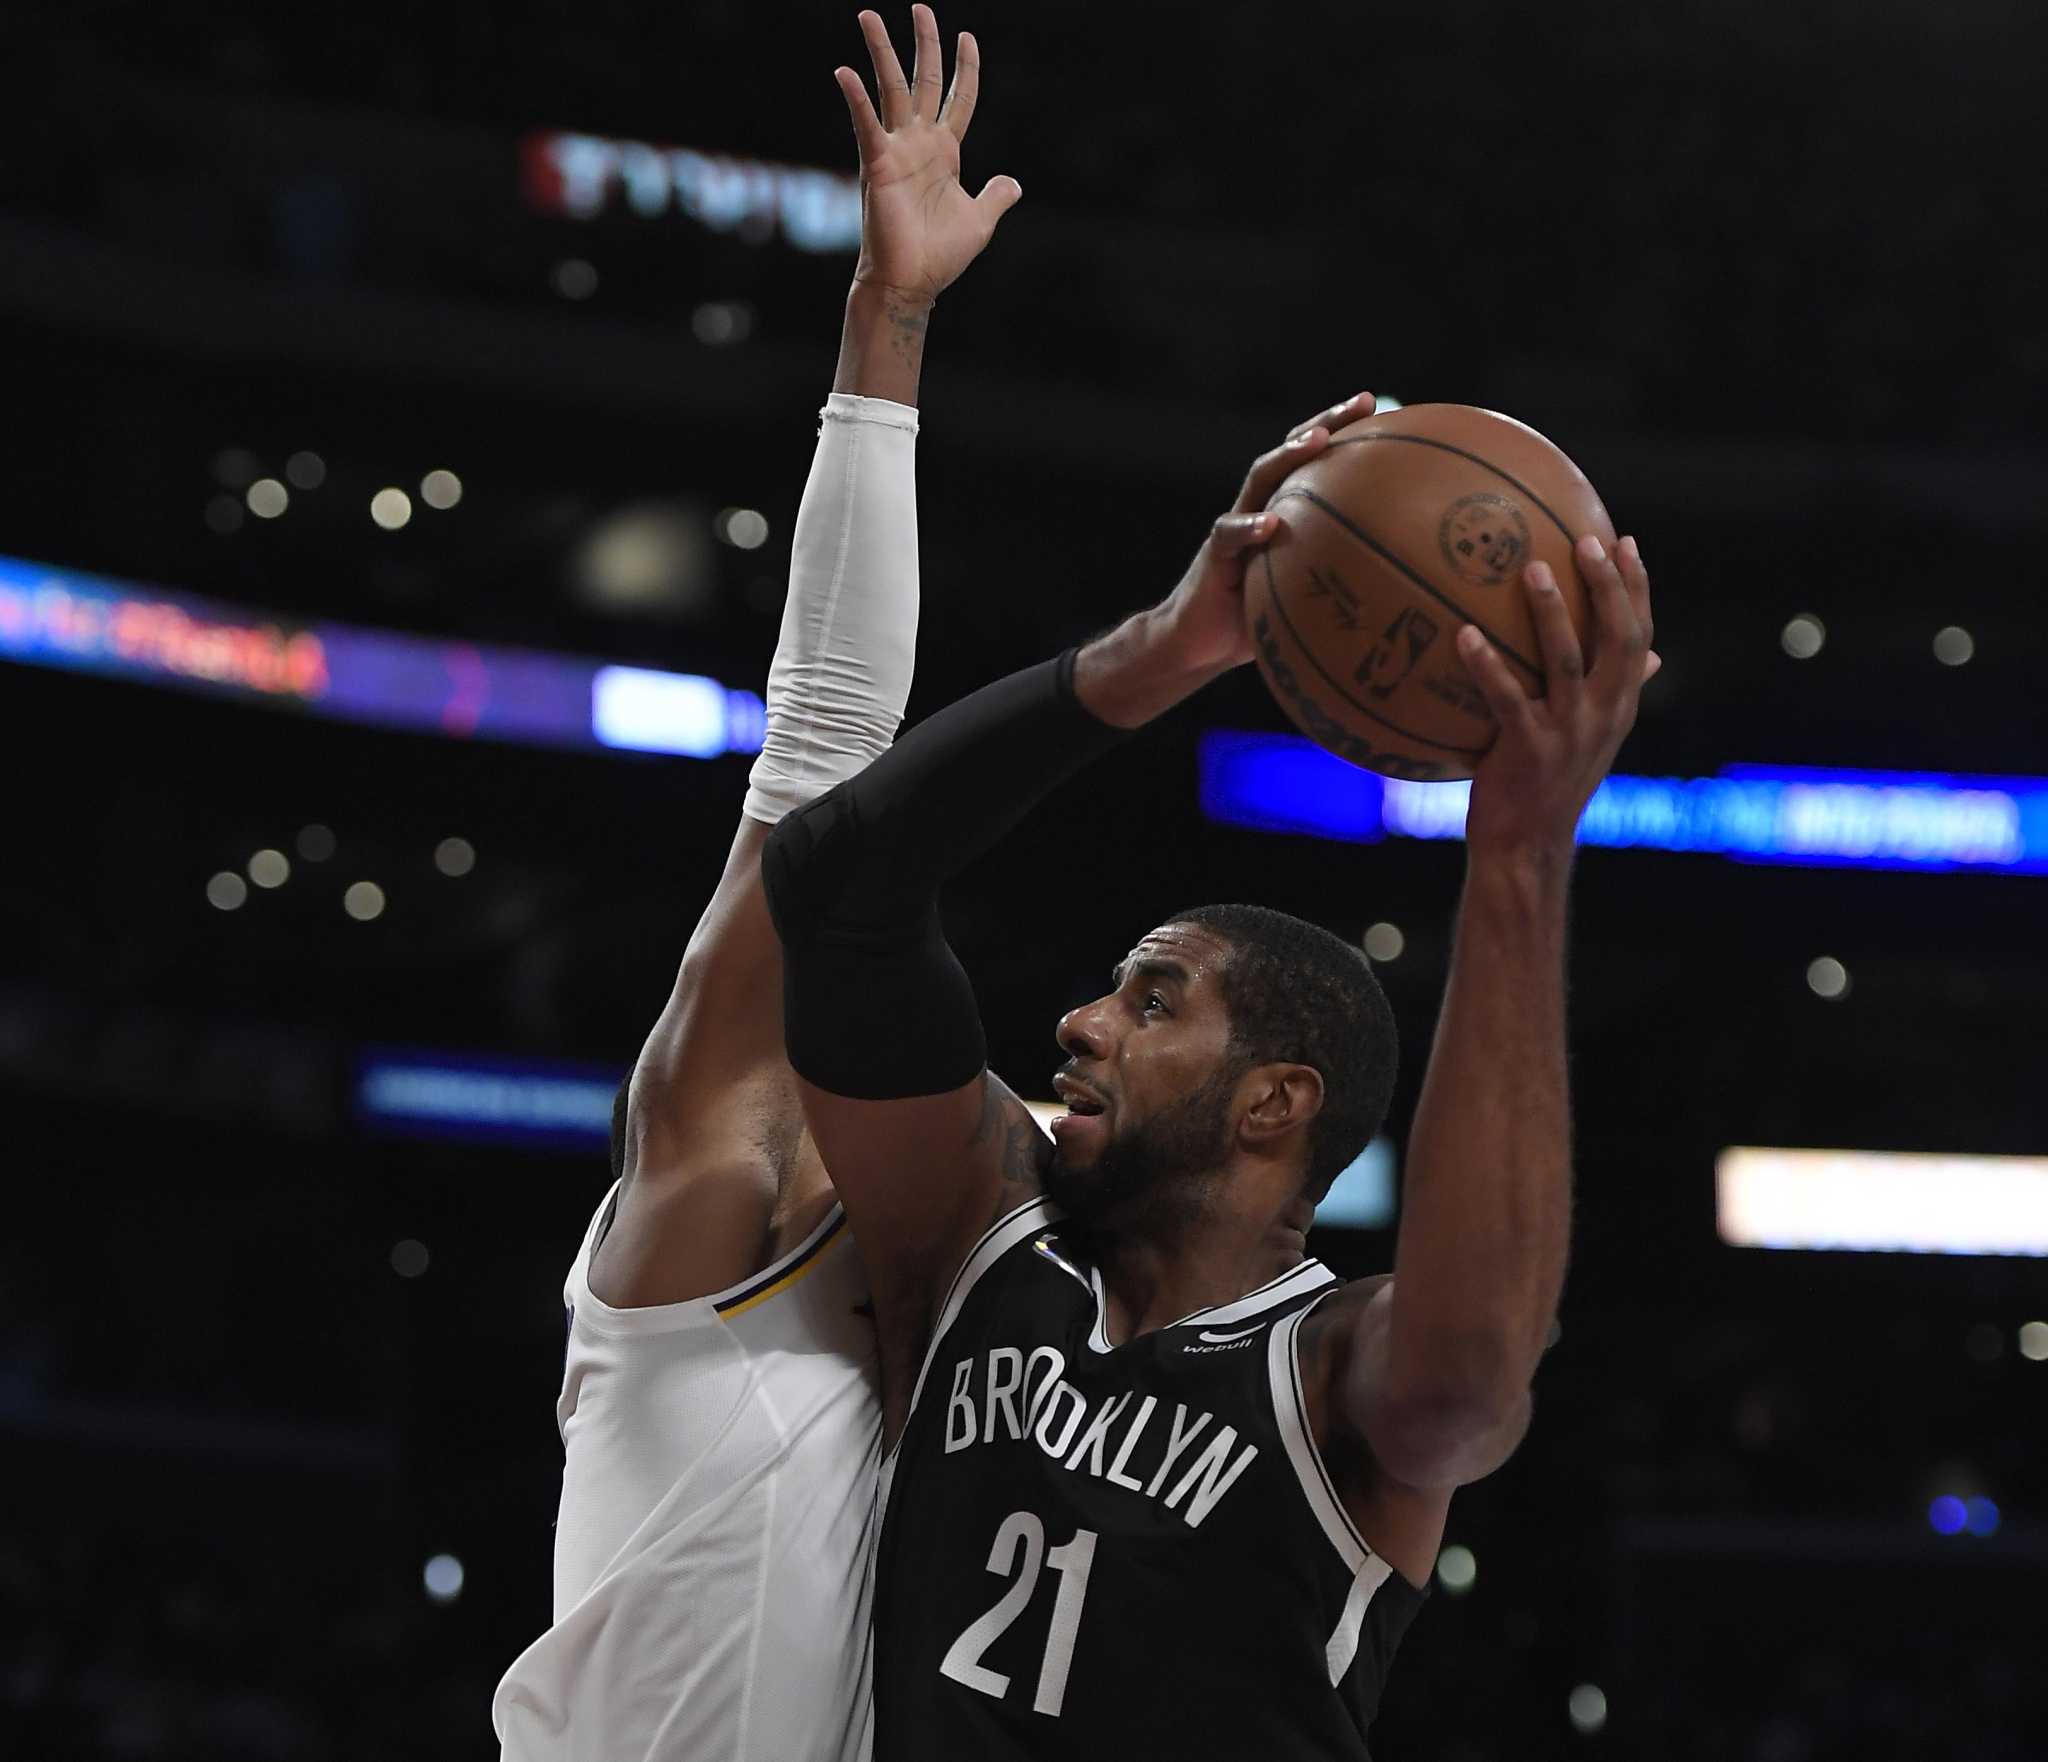 LaMarcus Aldridge joining Nets after buyout from Spurs